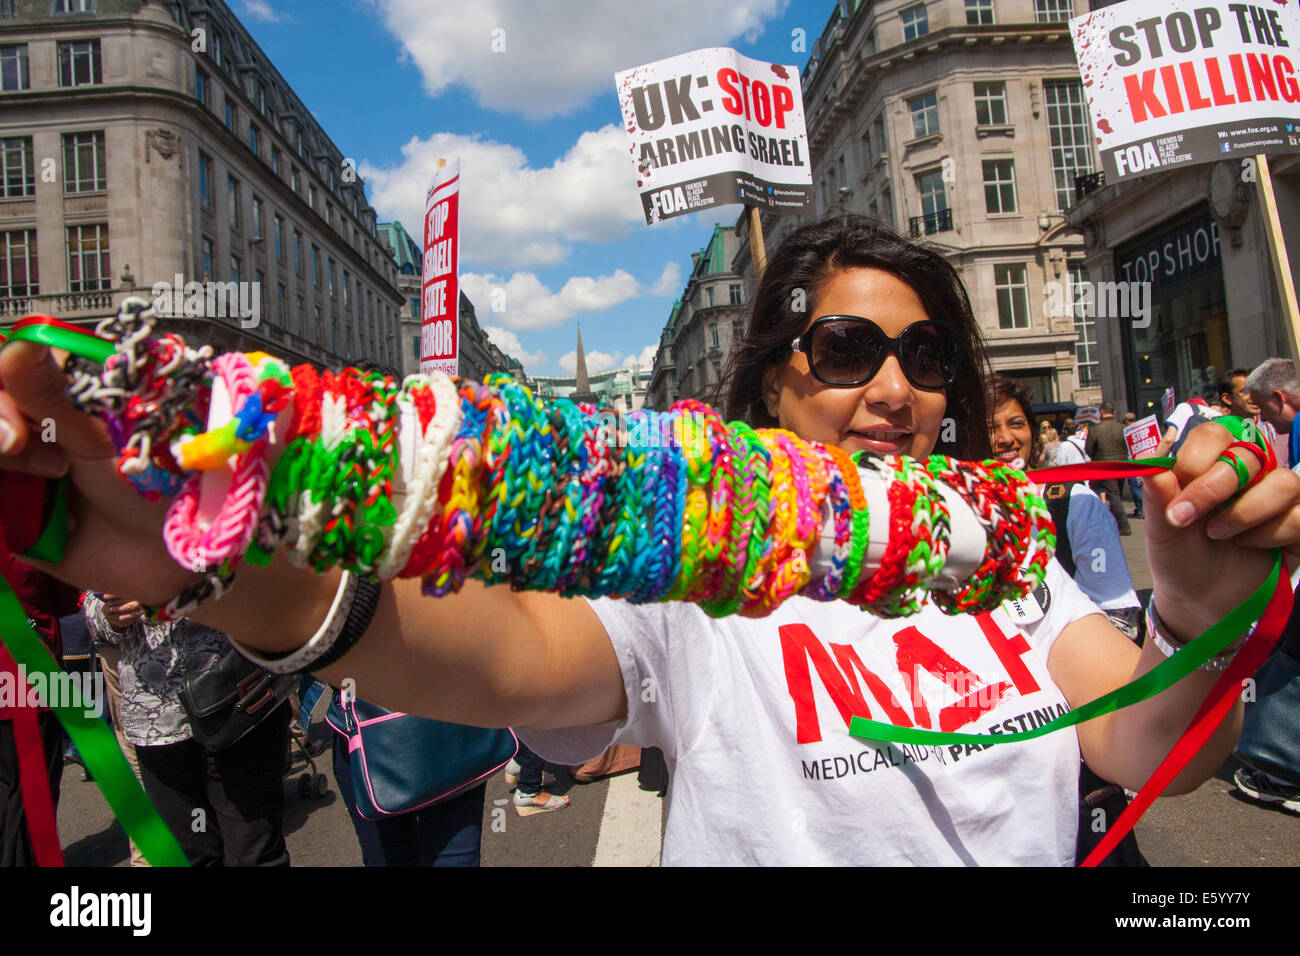 London, UK. 9th August, 2014.  A woman displays her loom bands as tens of thousands from across the UK march in support of the people of |Palestine. Credit:  Paul Davey/Alamy Live News Stock Photo